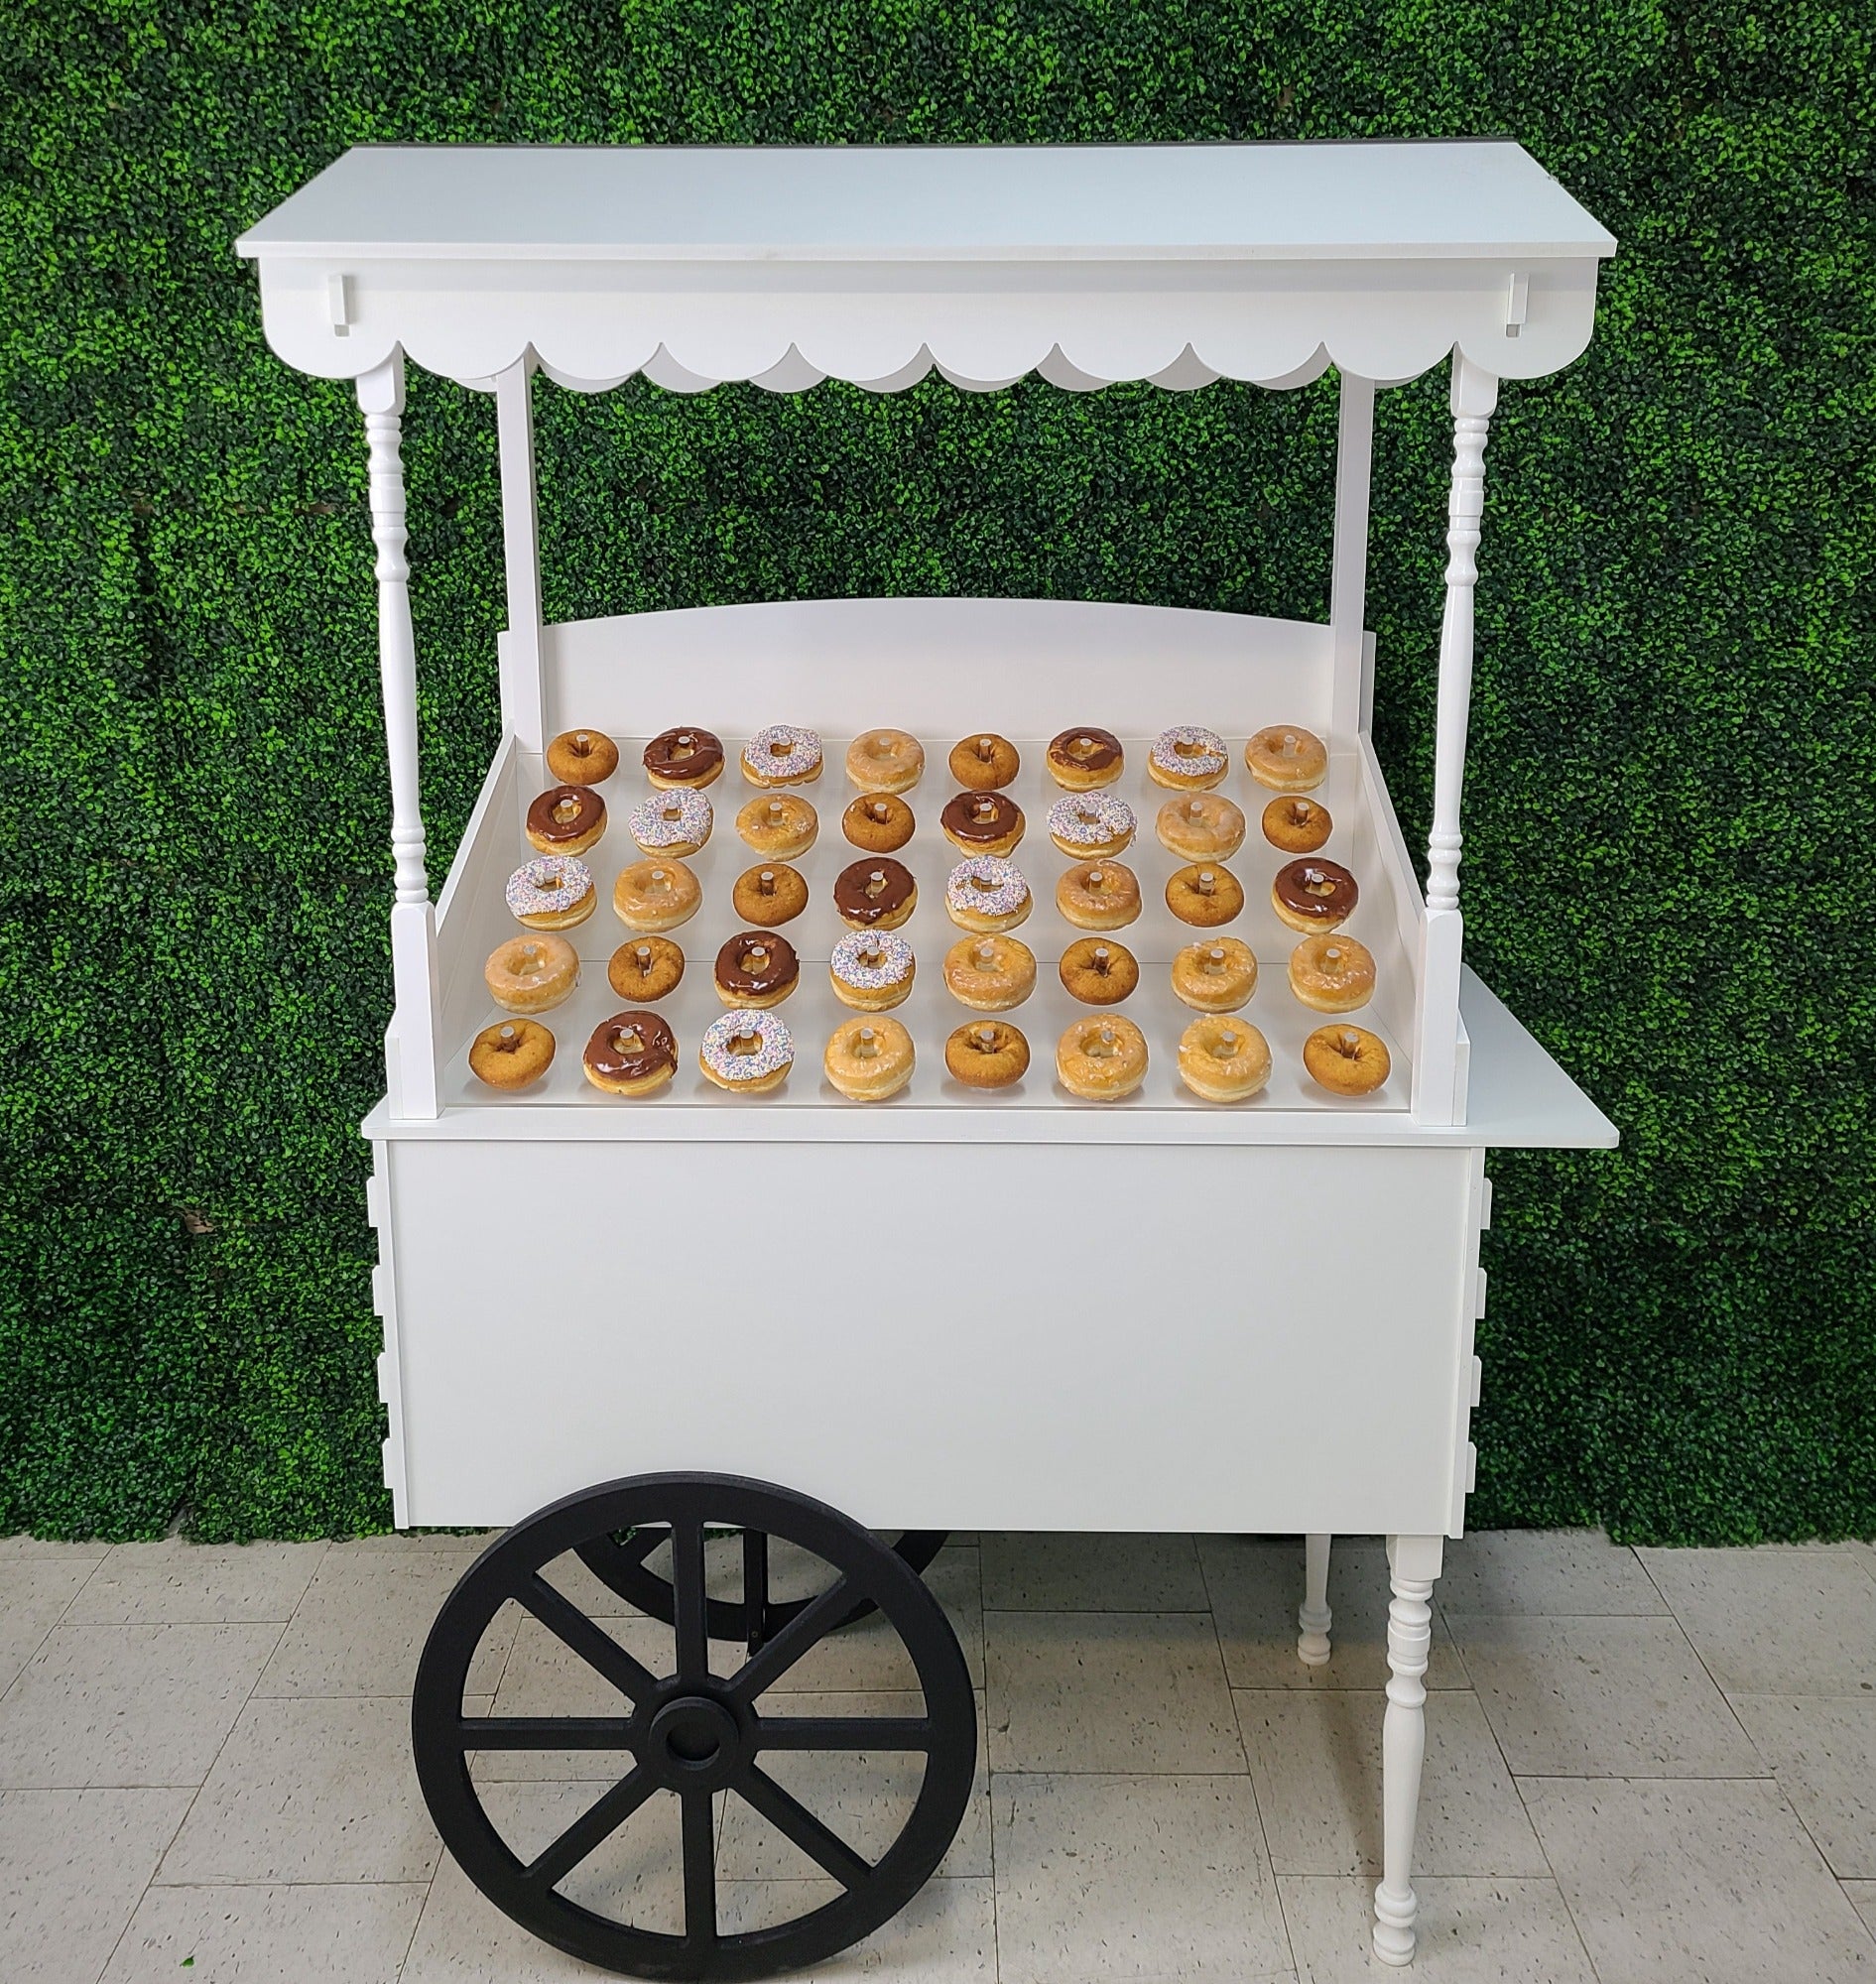 donut cart, candy cart, cake stand, mini bar, photo booth backdrop, multifunctional, durable, easy to maintain, white PVC, clear acrylic, collapsible, washable, 20kg capacity, 44lbs capacity, quick assembly, weddings, birthdays, baby showers, graduations, corporate events, special occasions